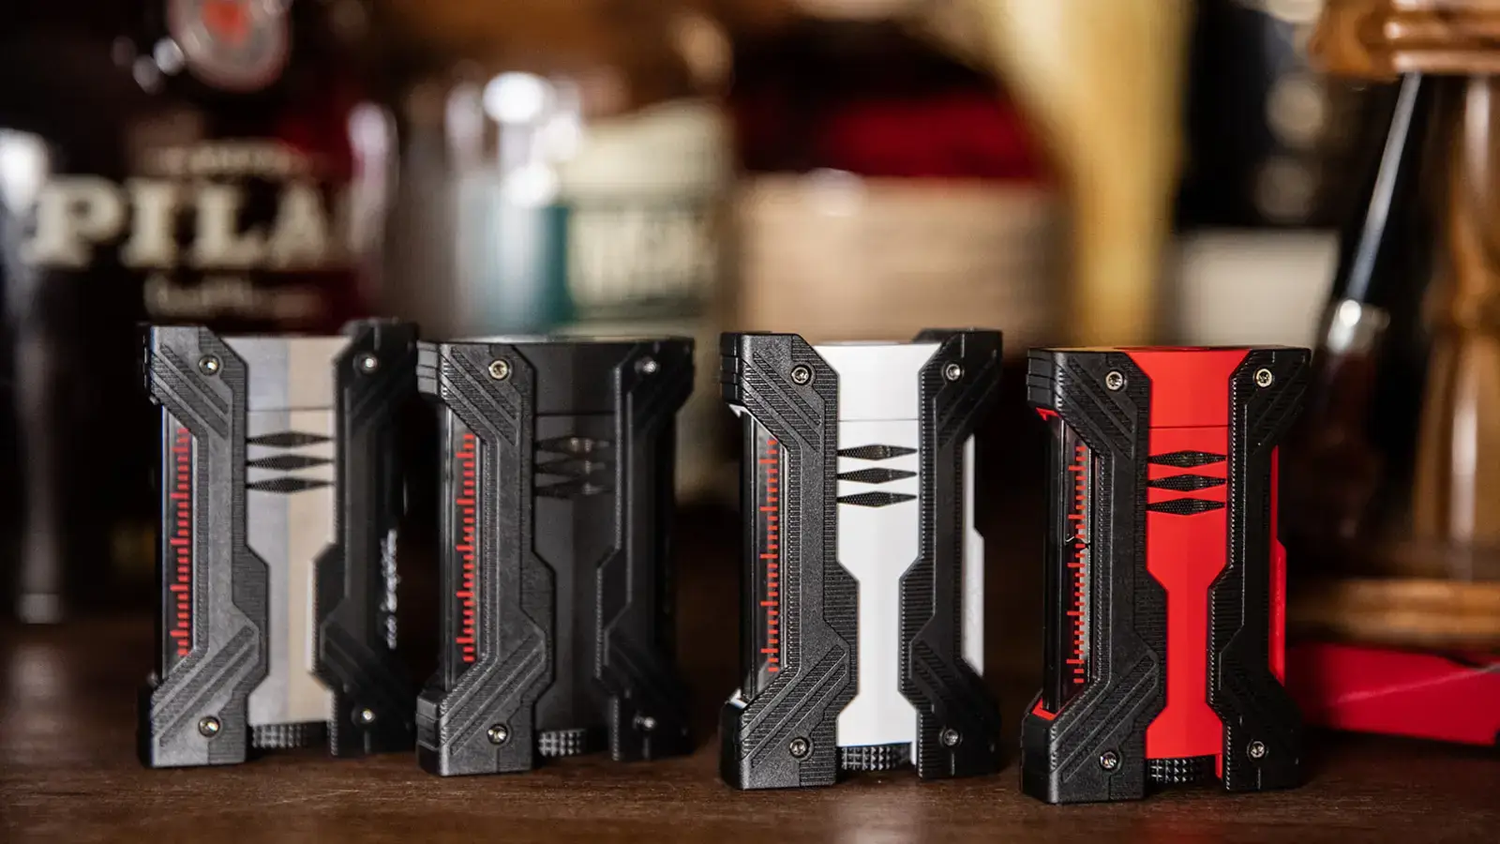 S.T. Dupont Defi XXtreme double flame torch lighters in chrome,, matte black, white and red with black accents.